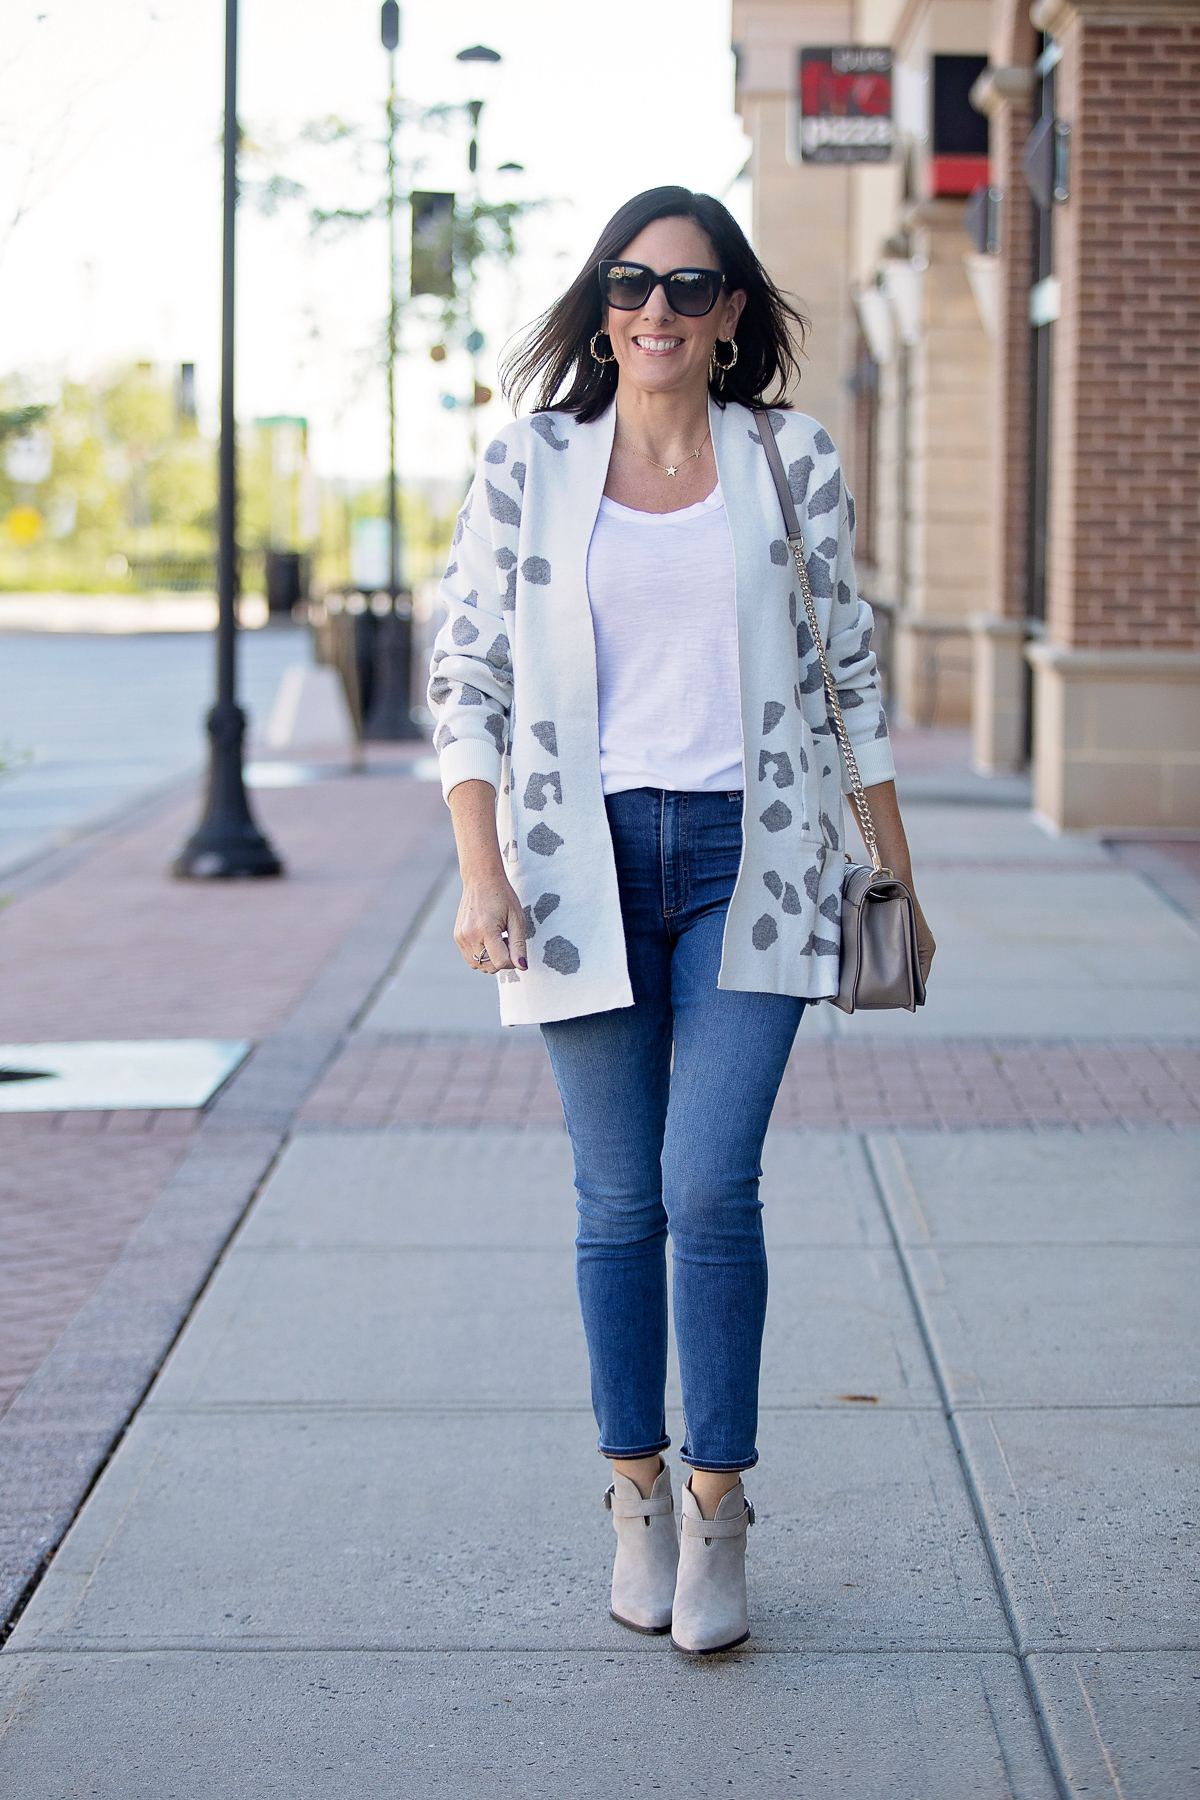 Leopard Print Cardigan Outfit | 22 Days of Fall Fashion